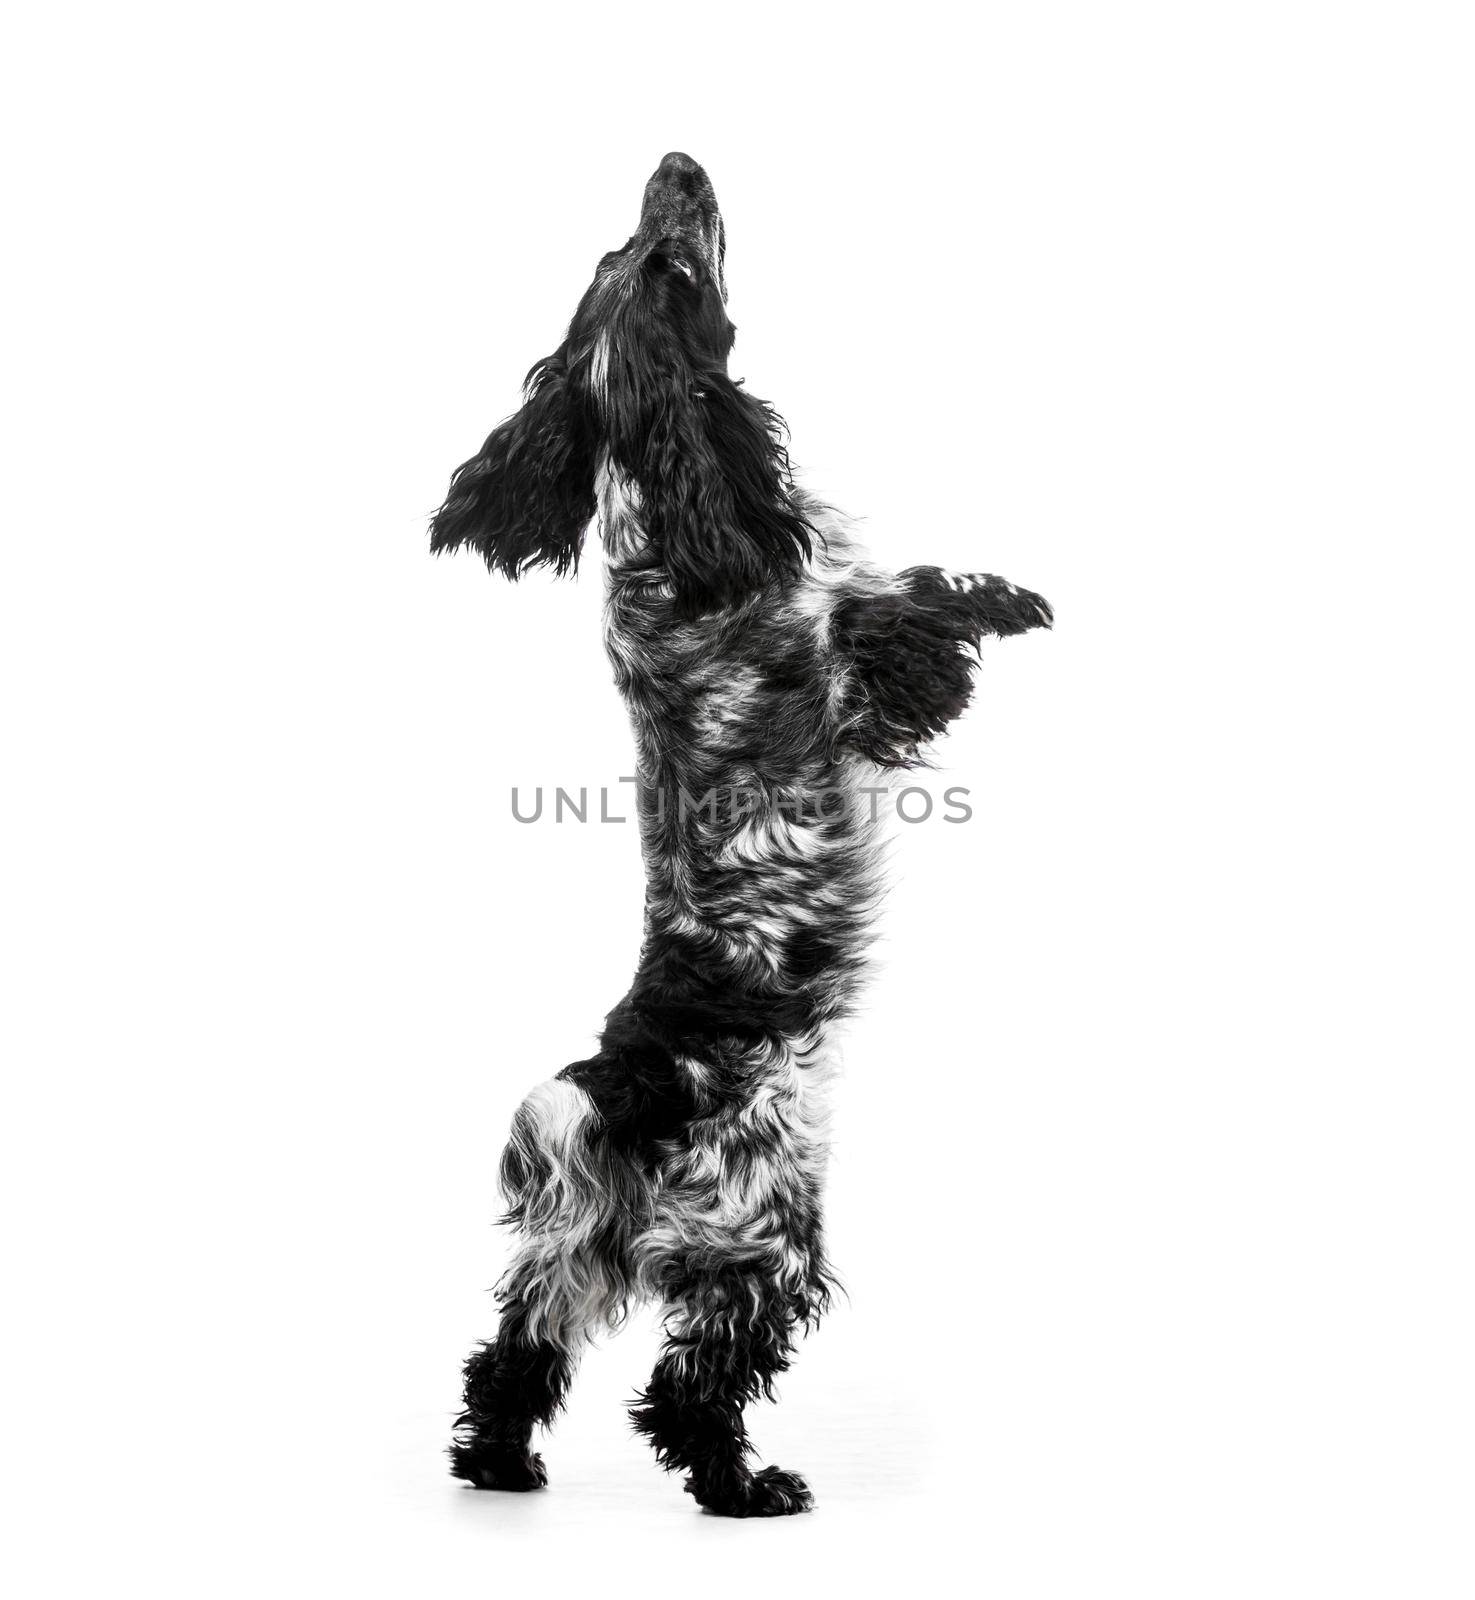 Cocker Spaniel puppy dog jump. Isolated on white